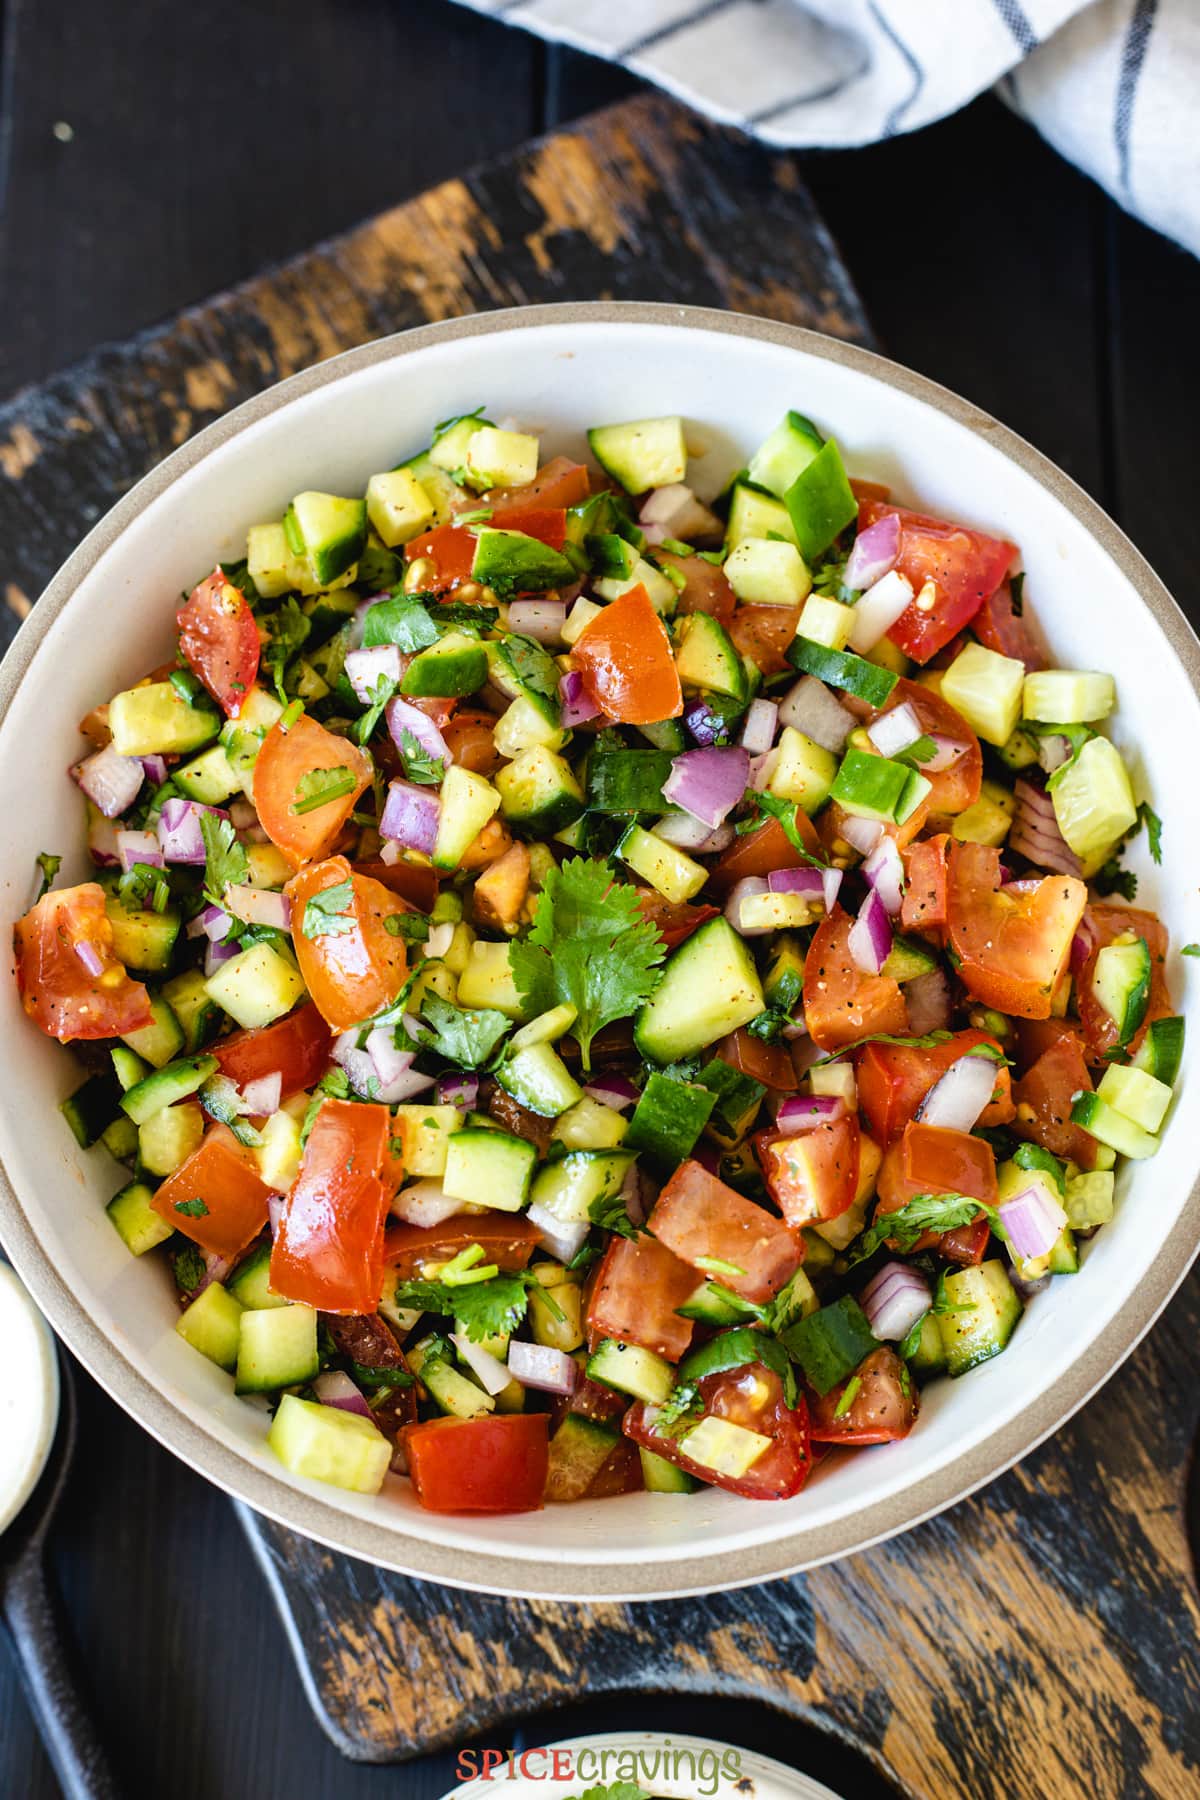 chopped salad made of cucumber, tomato and onion in white bowl